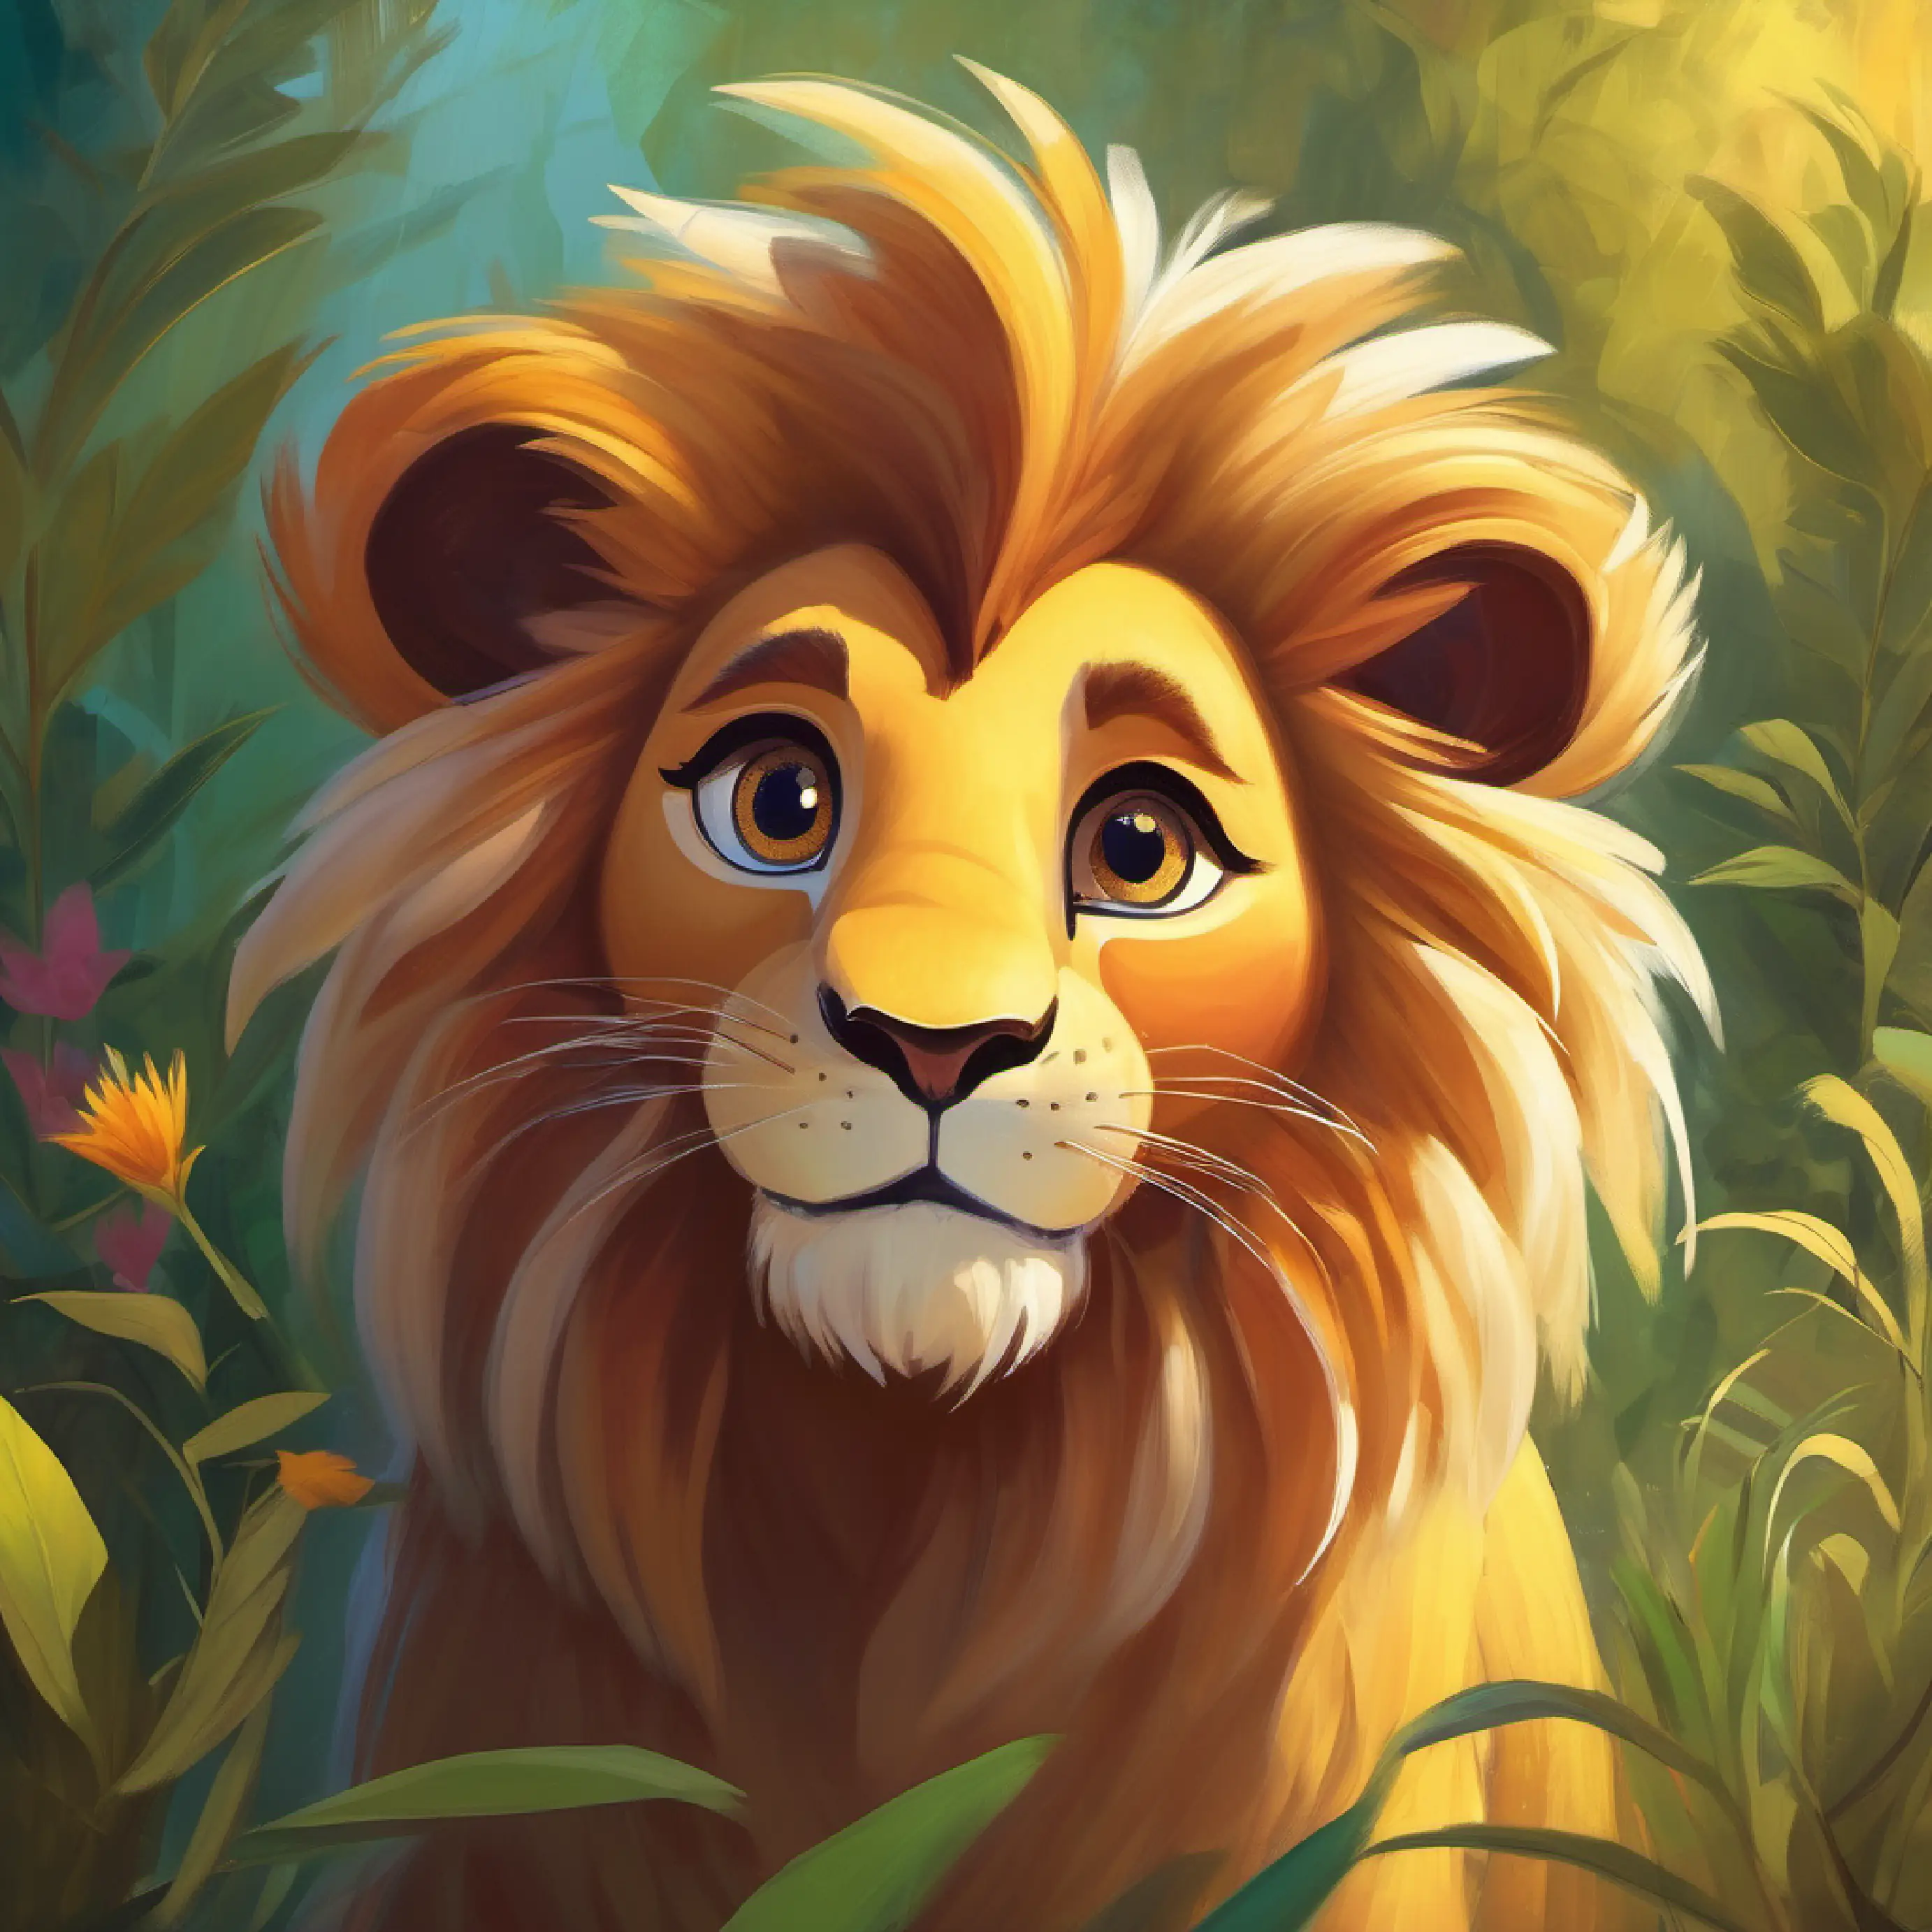 Lion practices positive communication with Playful, long-tailed, wide-eyed with curiosity.